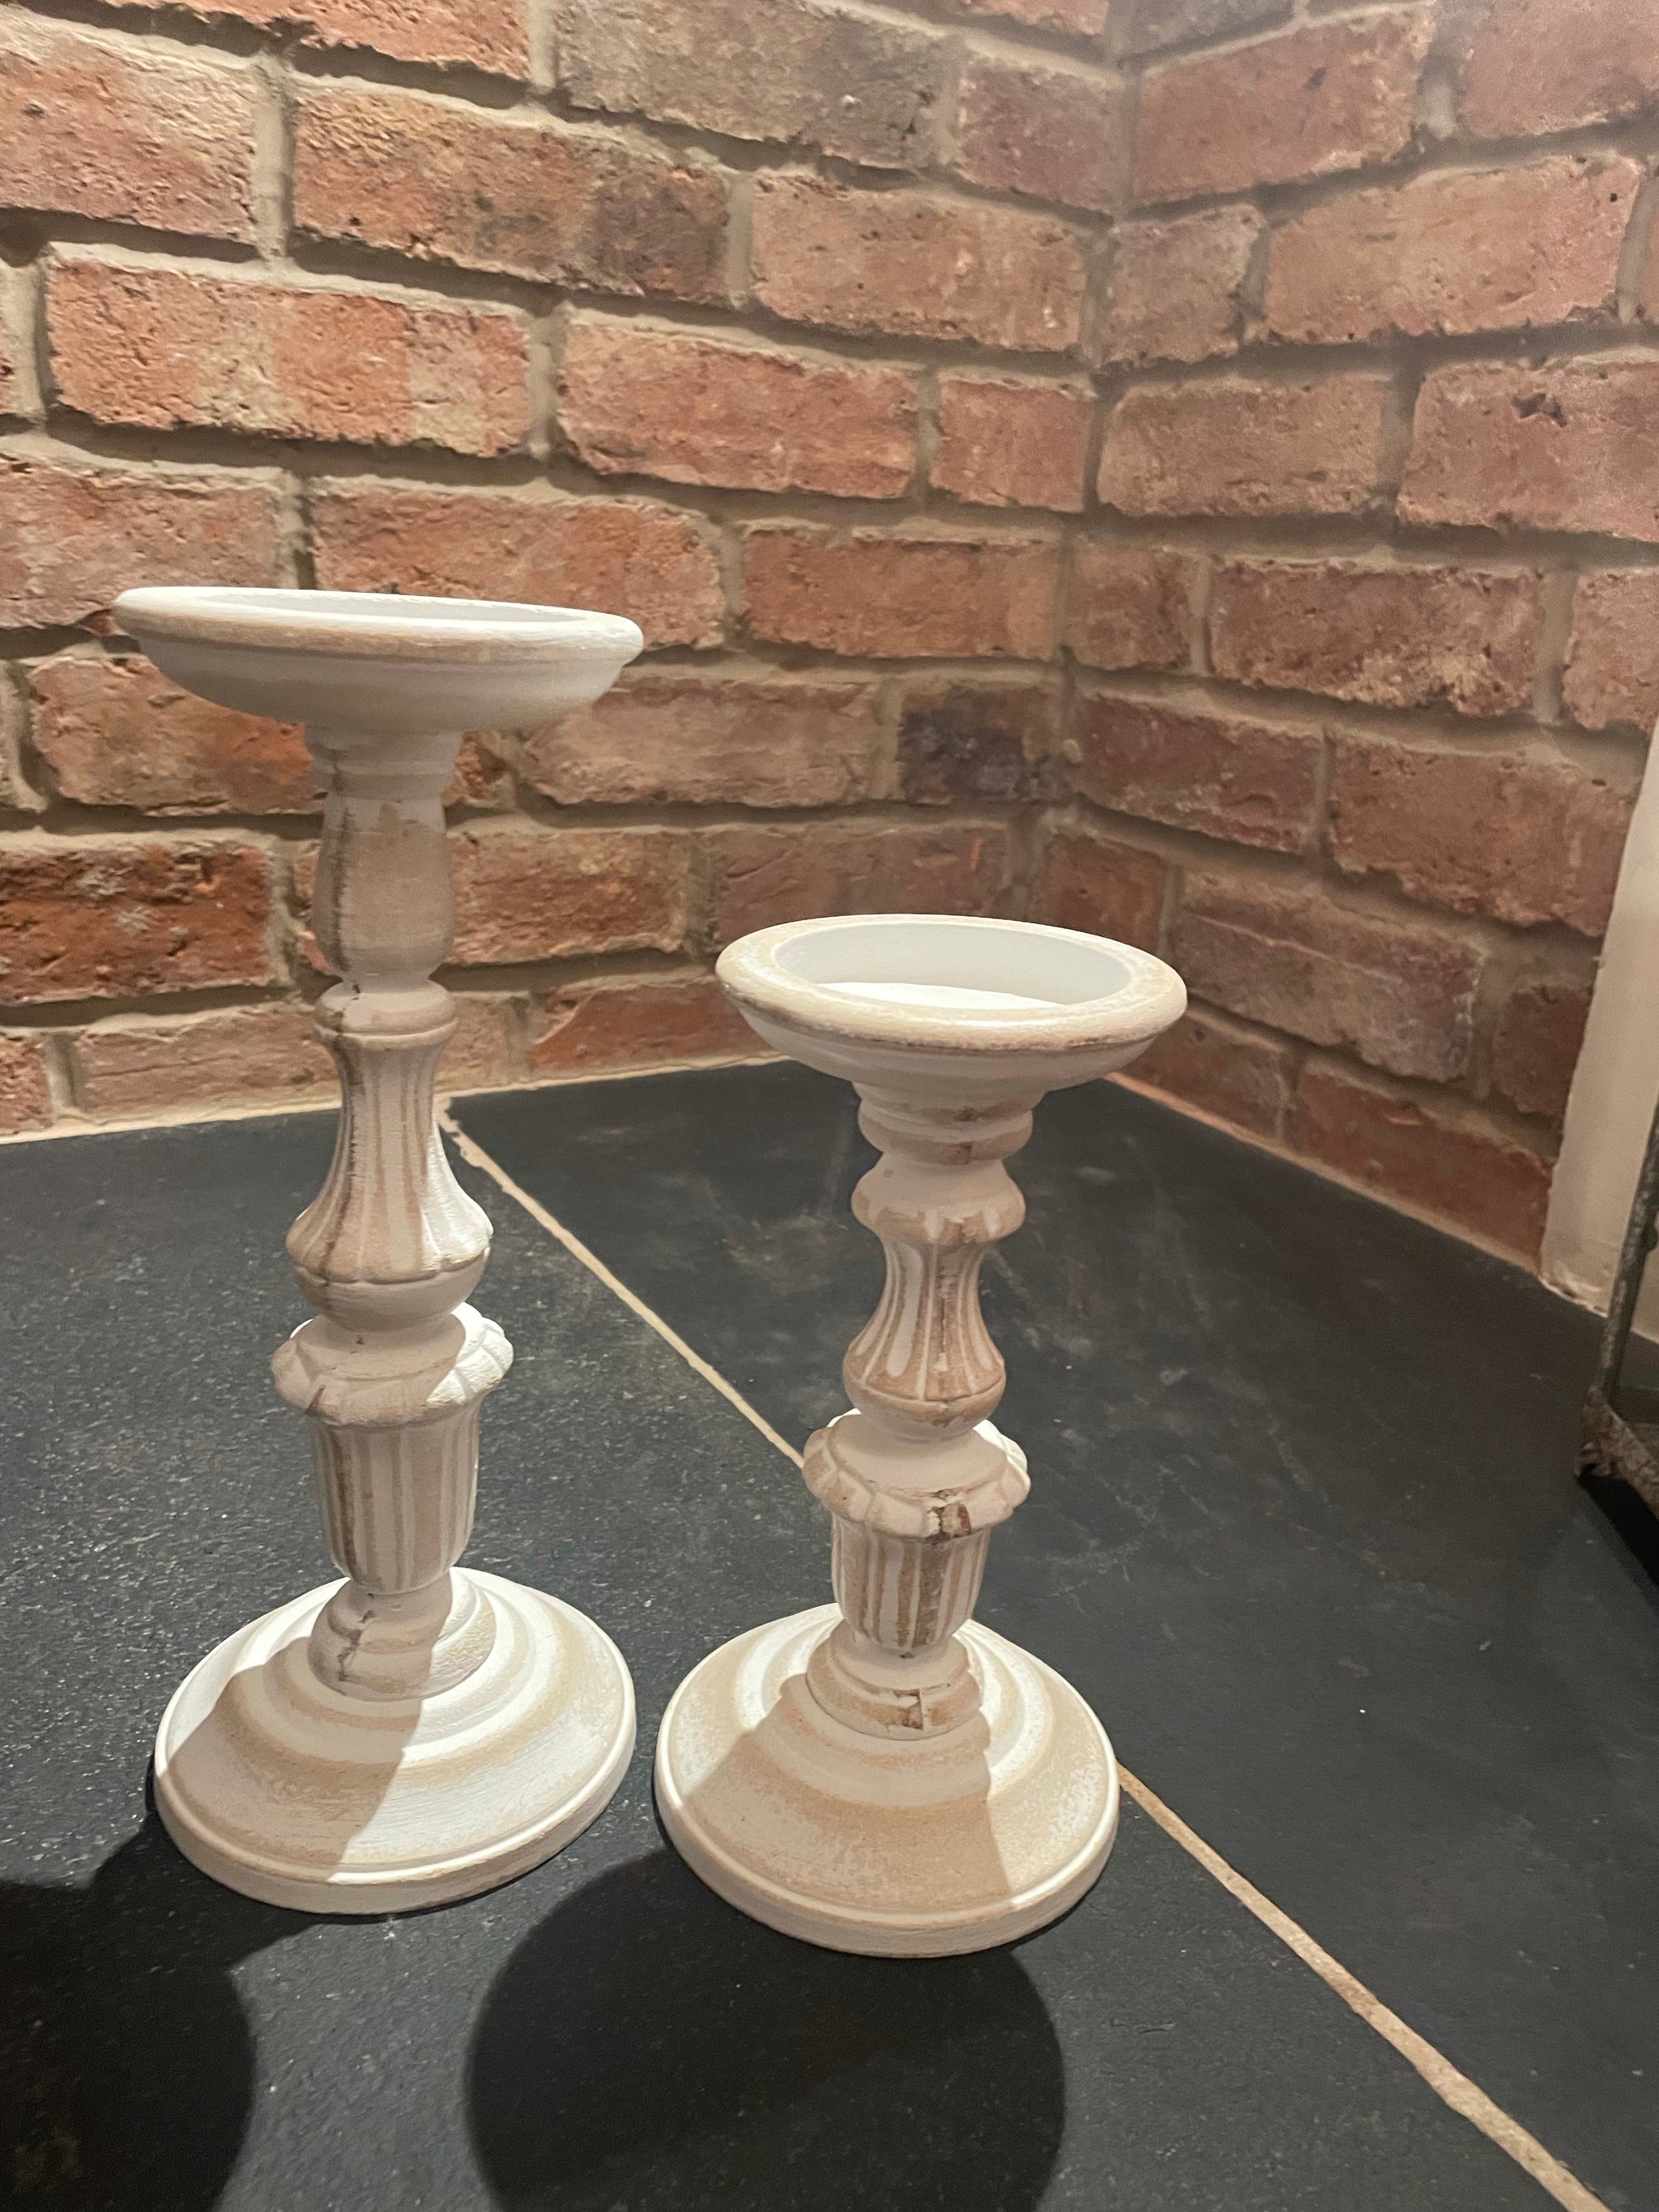 Wooden Distressed Candle Holder - 2 Sizes